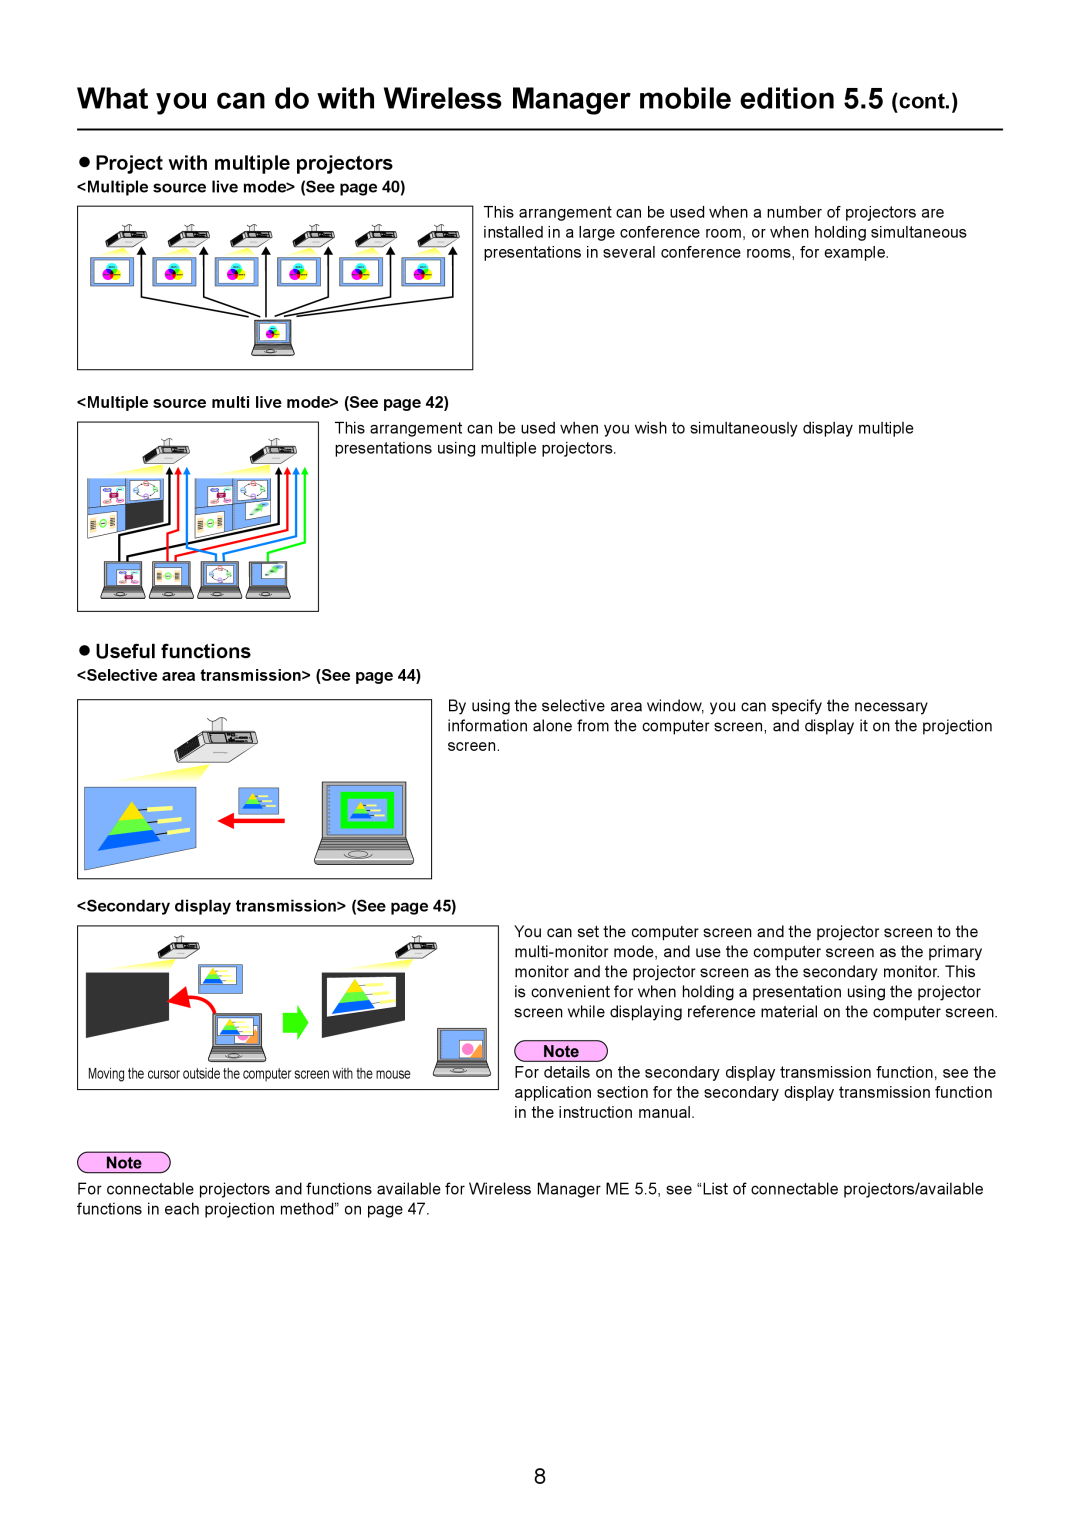 Panasonic TQBH0205-4 What you can do with Wireless Manager mobile edition 5.5 cont, Project with multiple projectors 